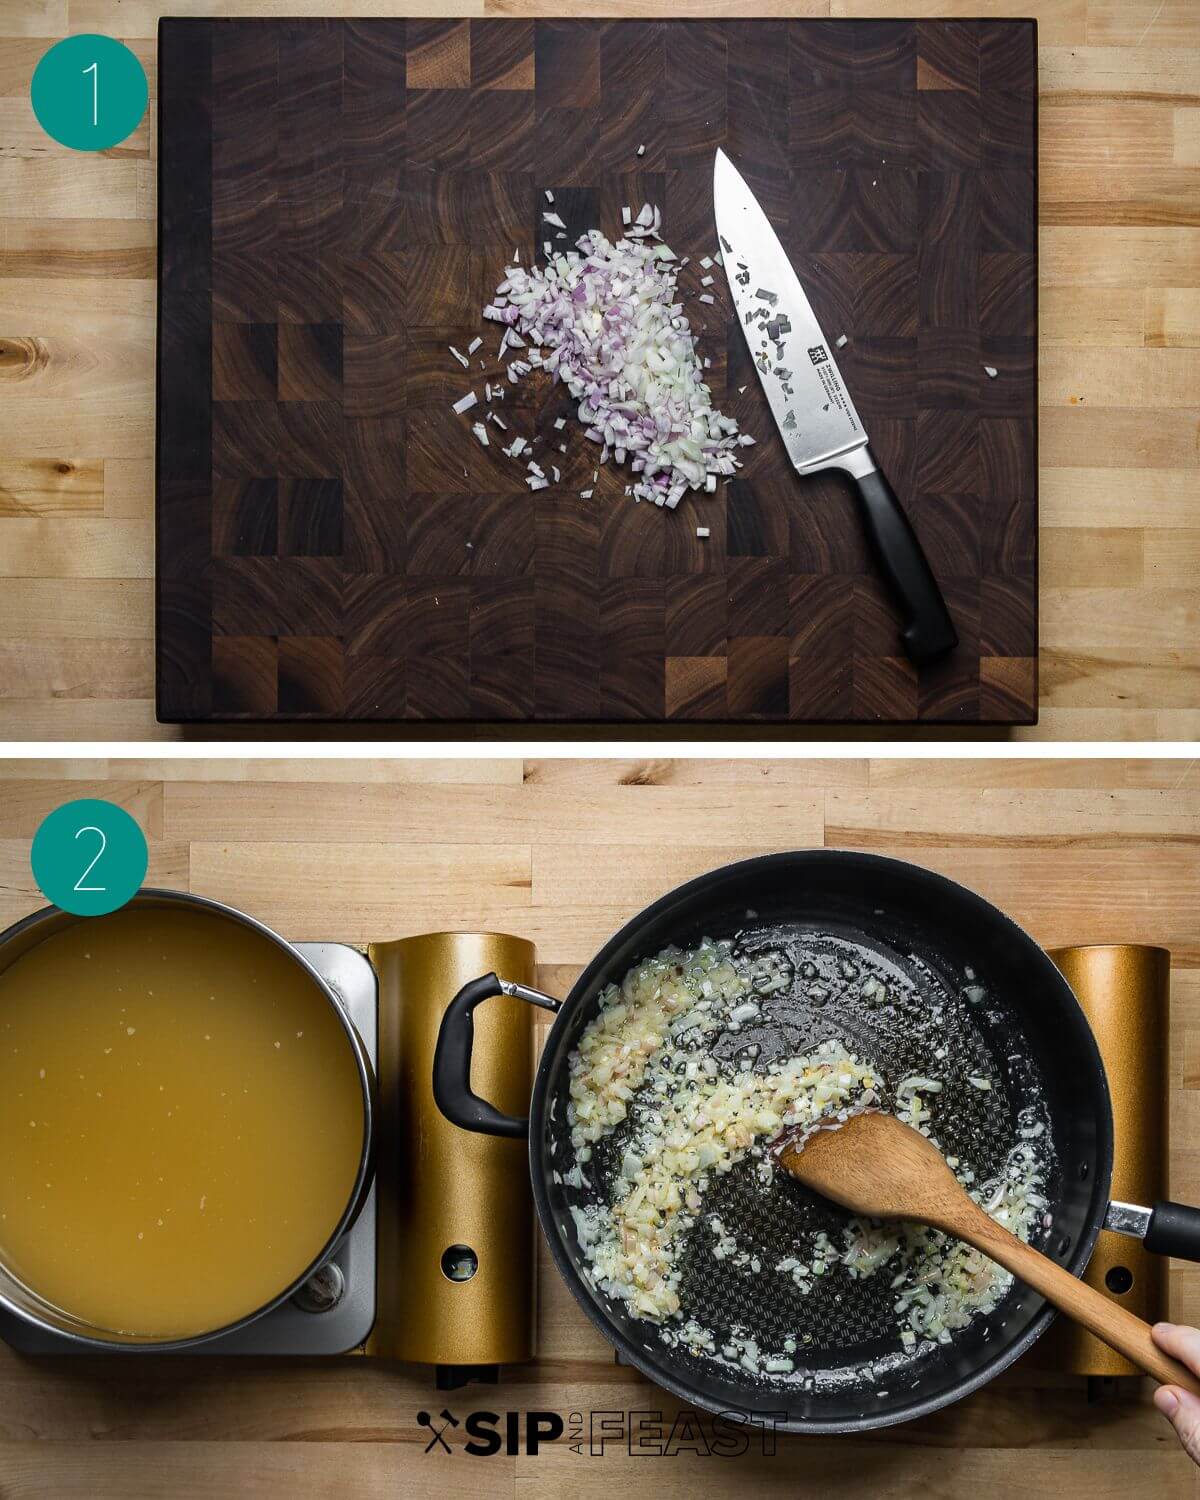 Risotto alla Milanese recipe process shot collage group number one.